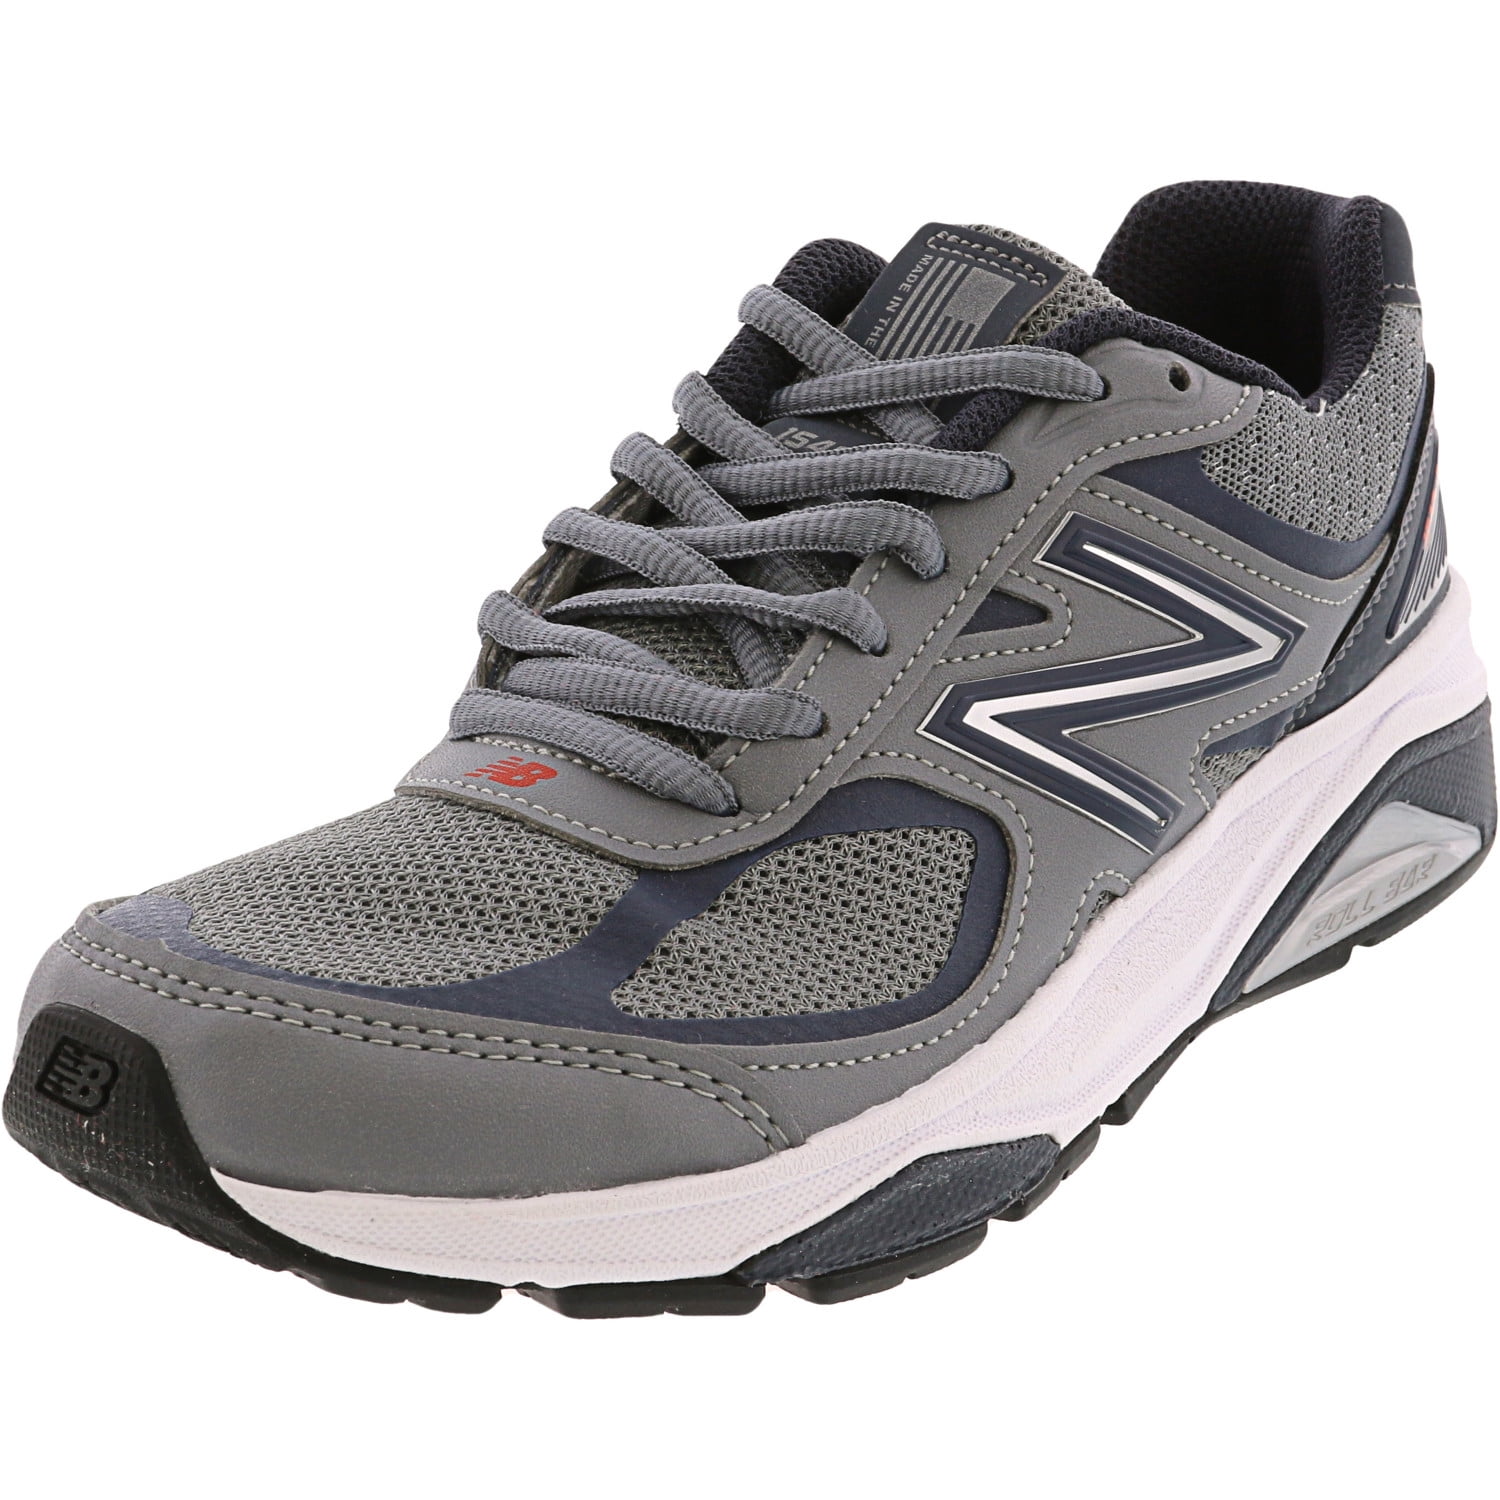 W1540 Gd3 Ankle-High Running 